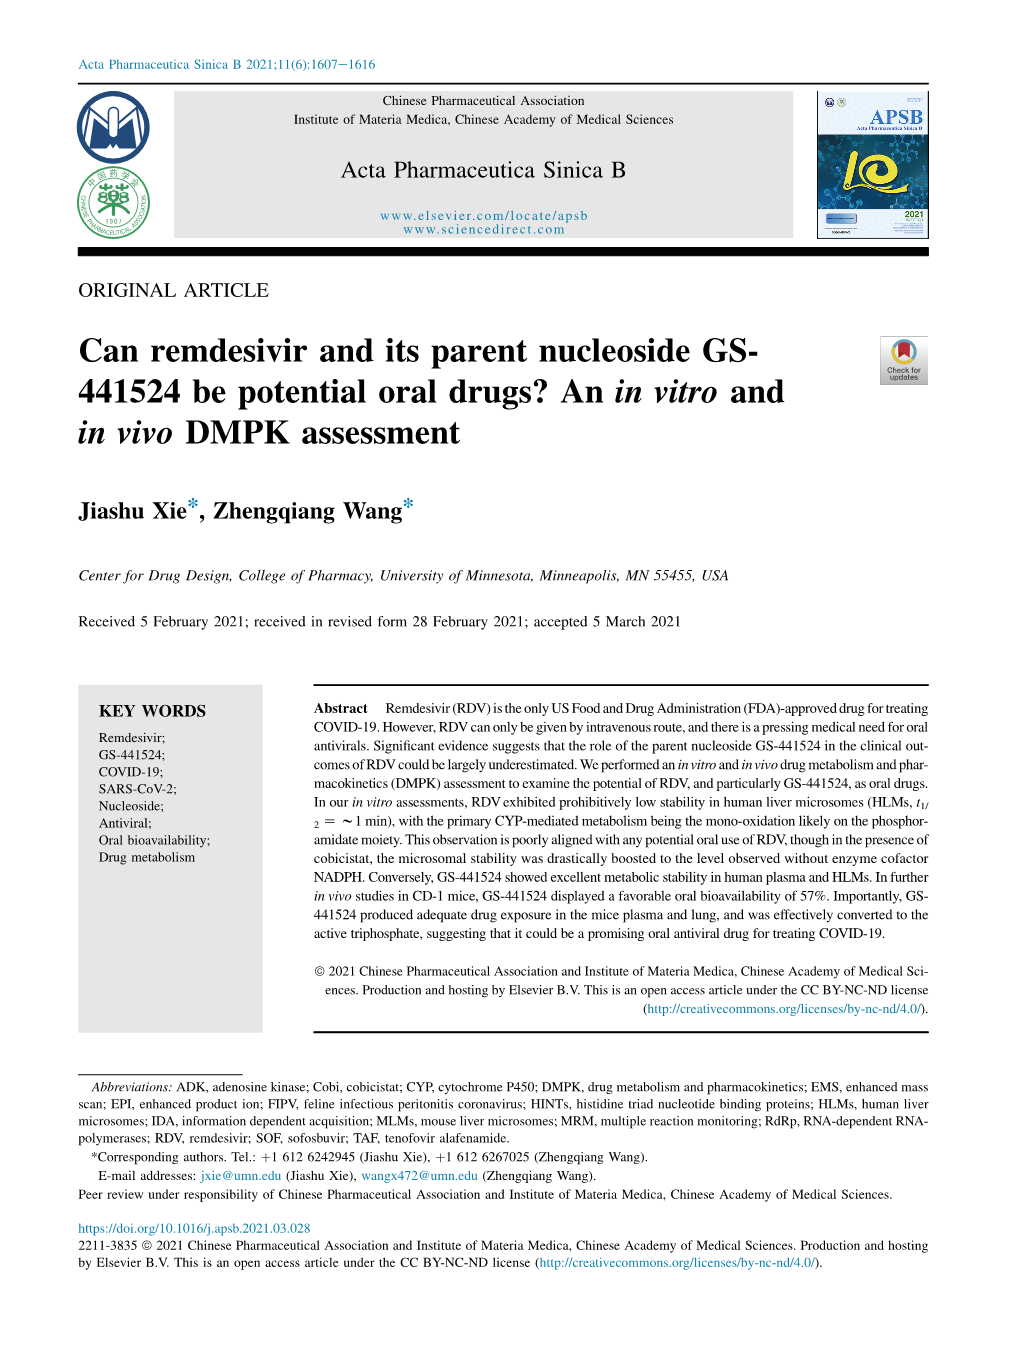 Can Remdesivir and Its Parent Nucleoside GS-441524 Be Potential